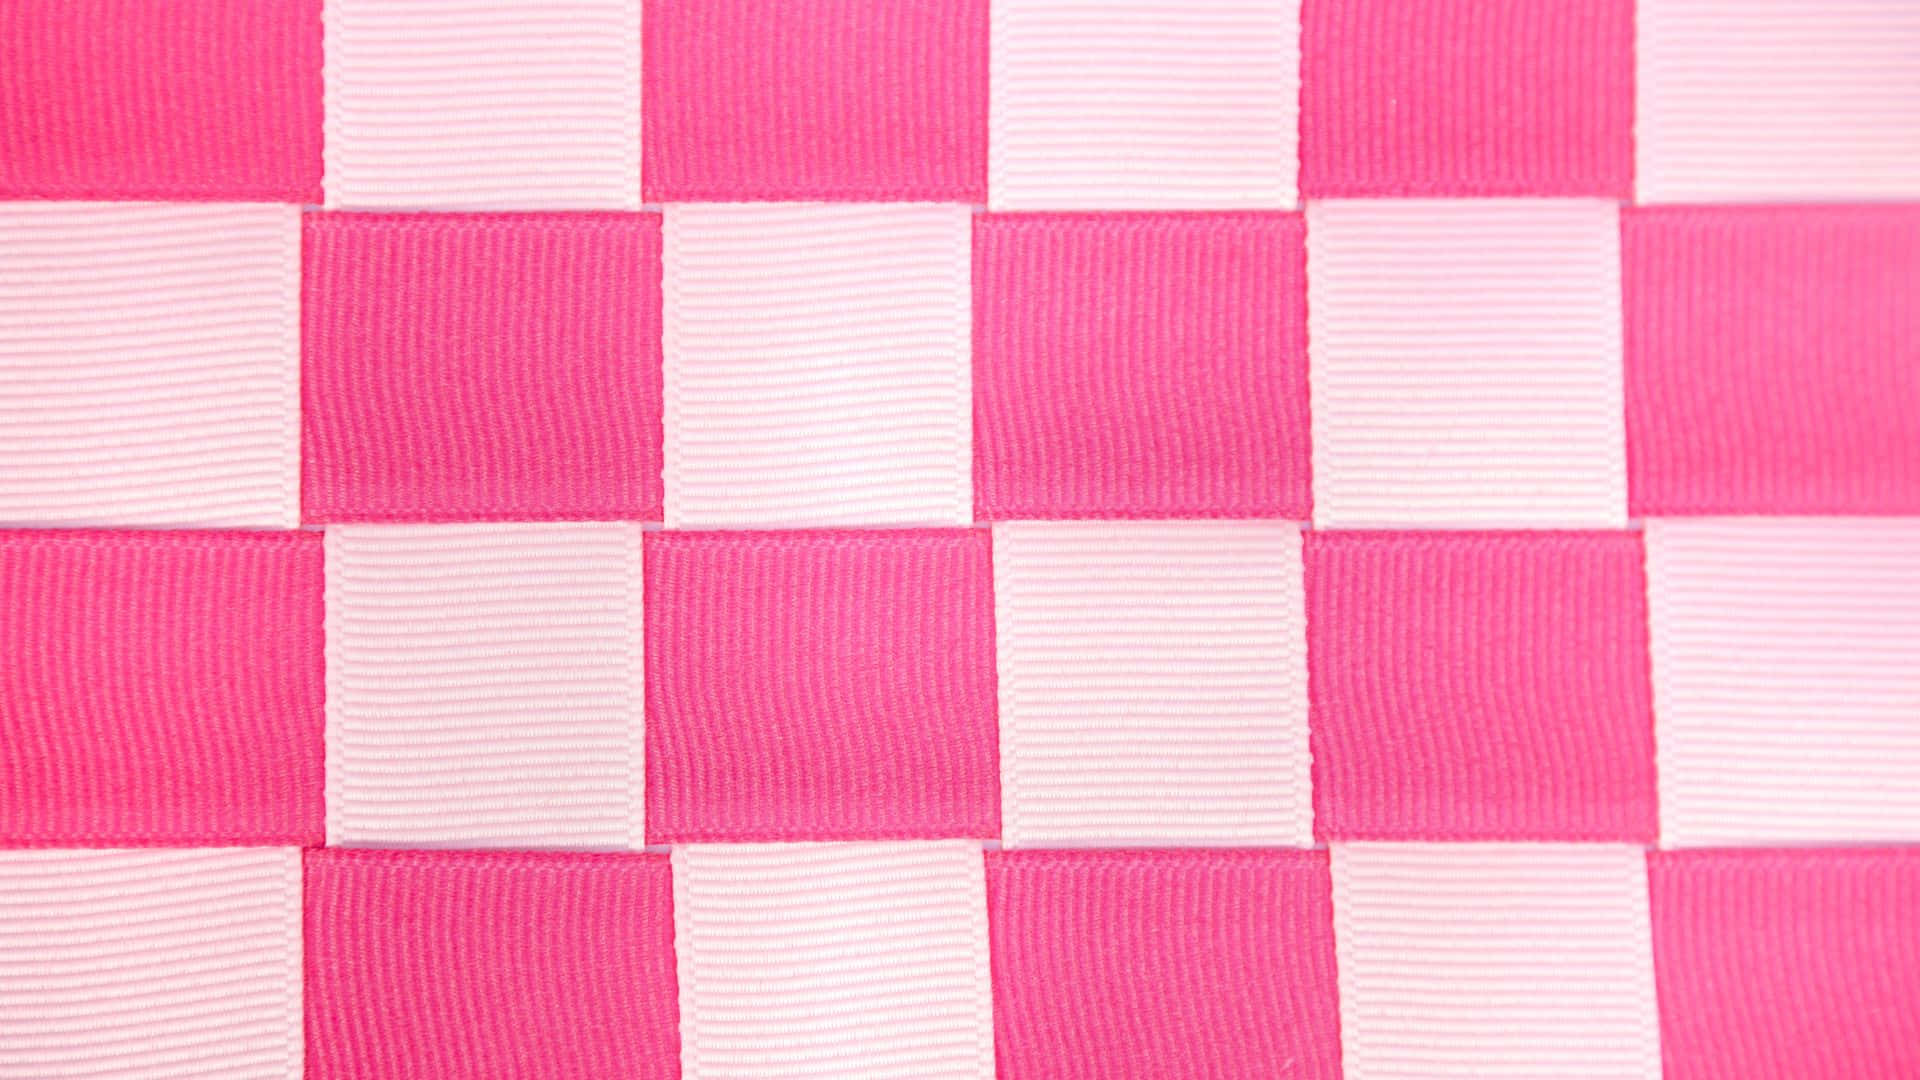 A vibrant pink checkered pattern fills the entire frame. Wallpaper